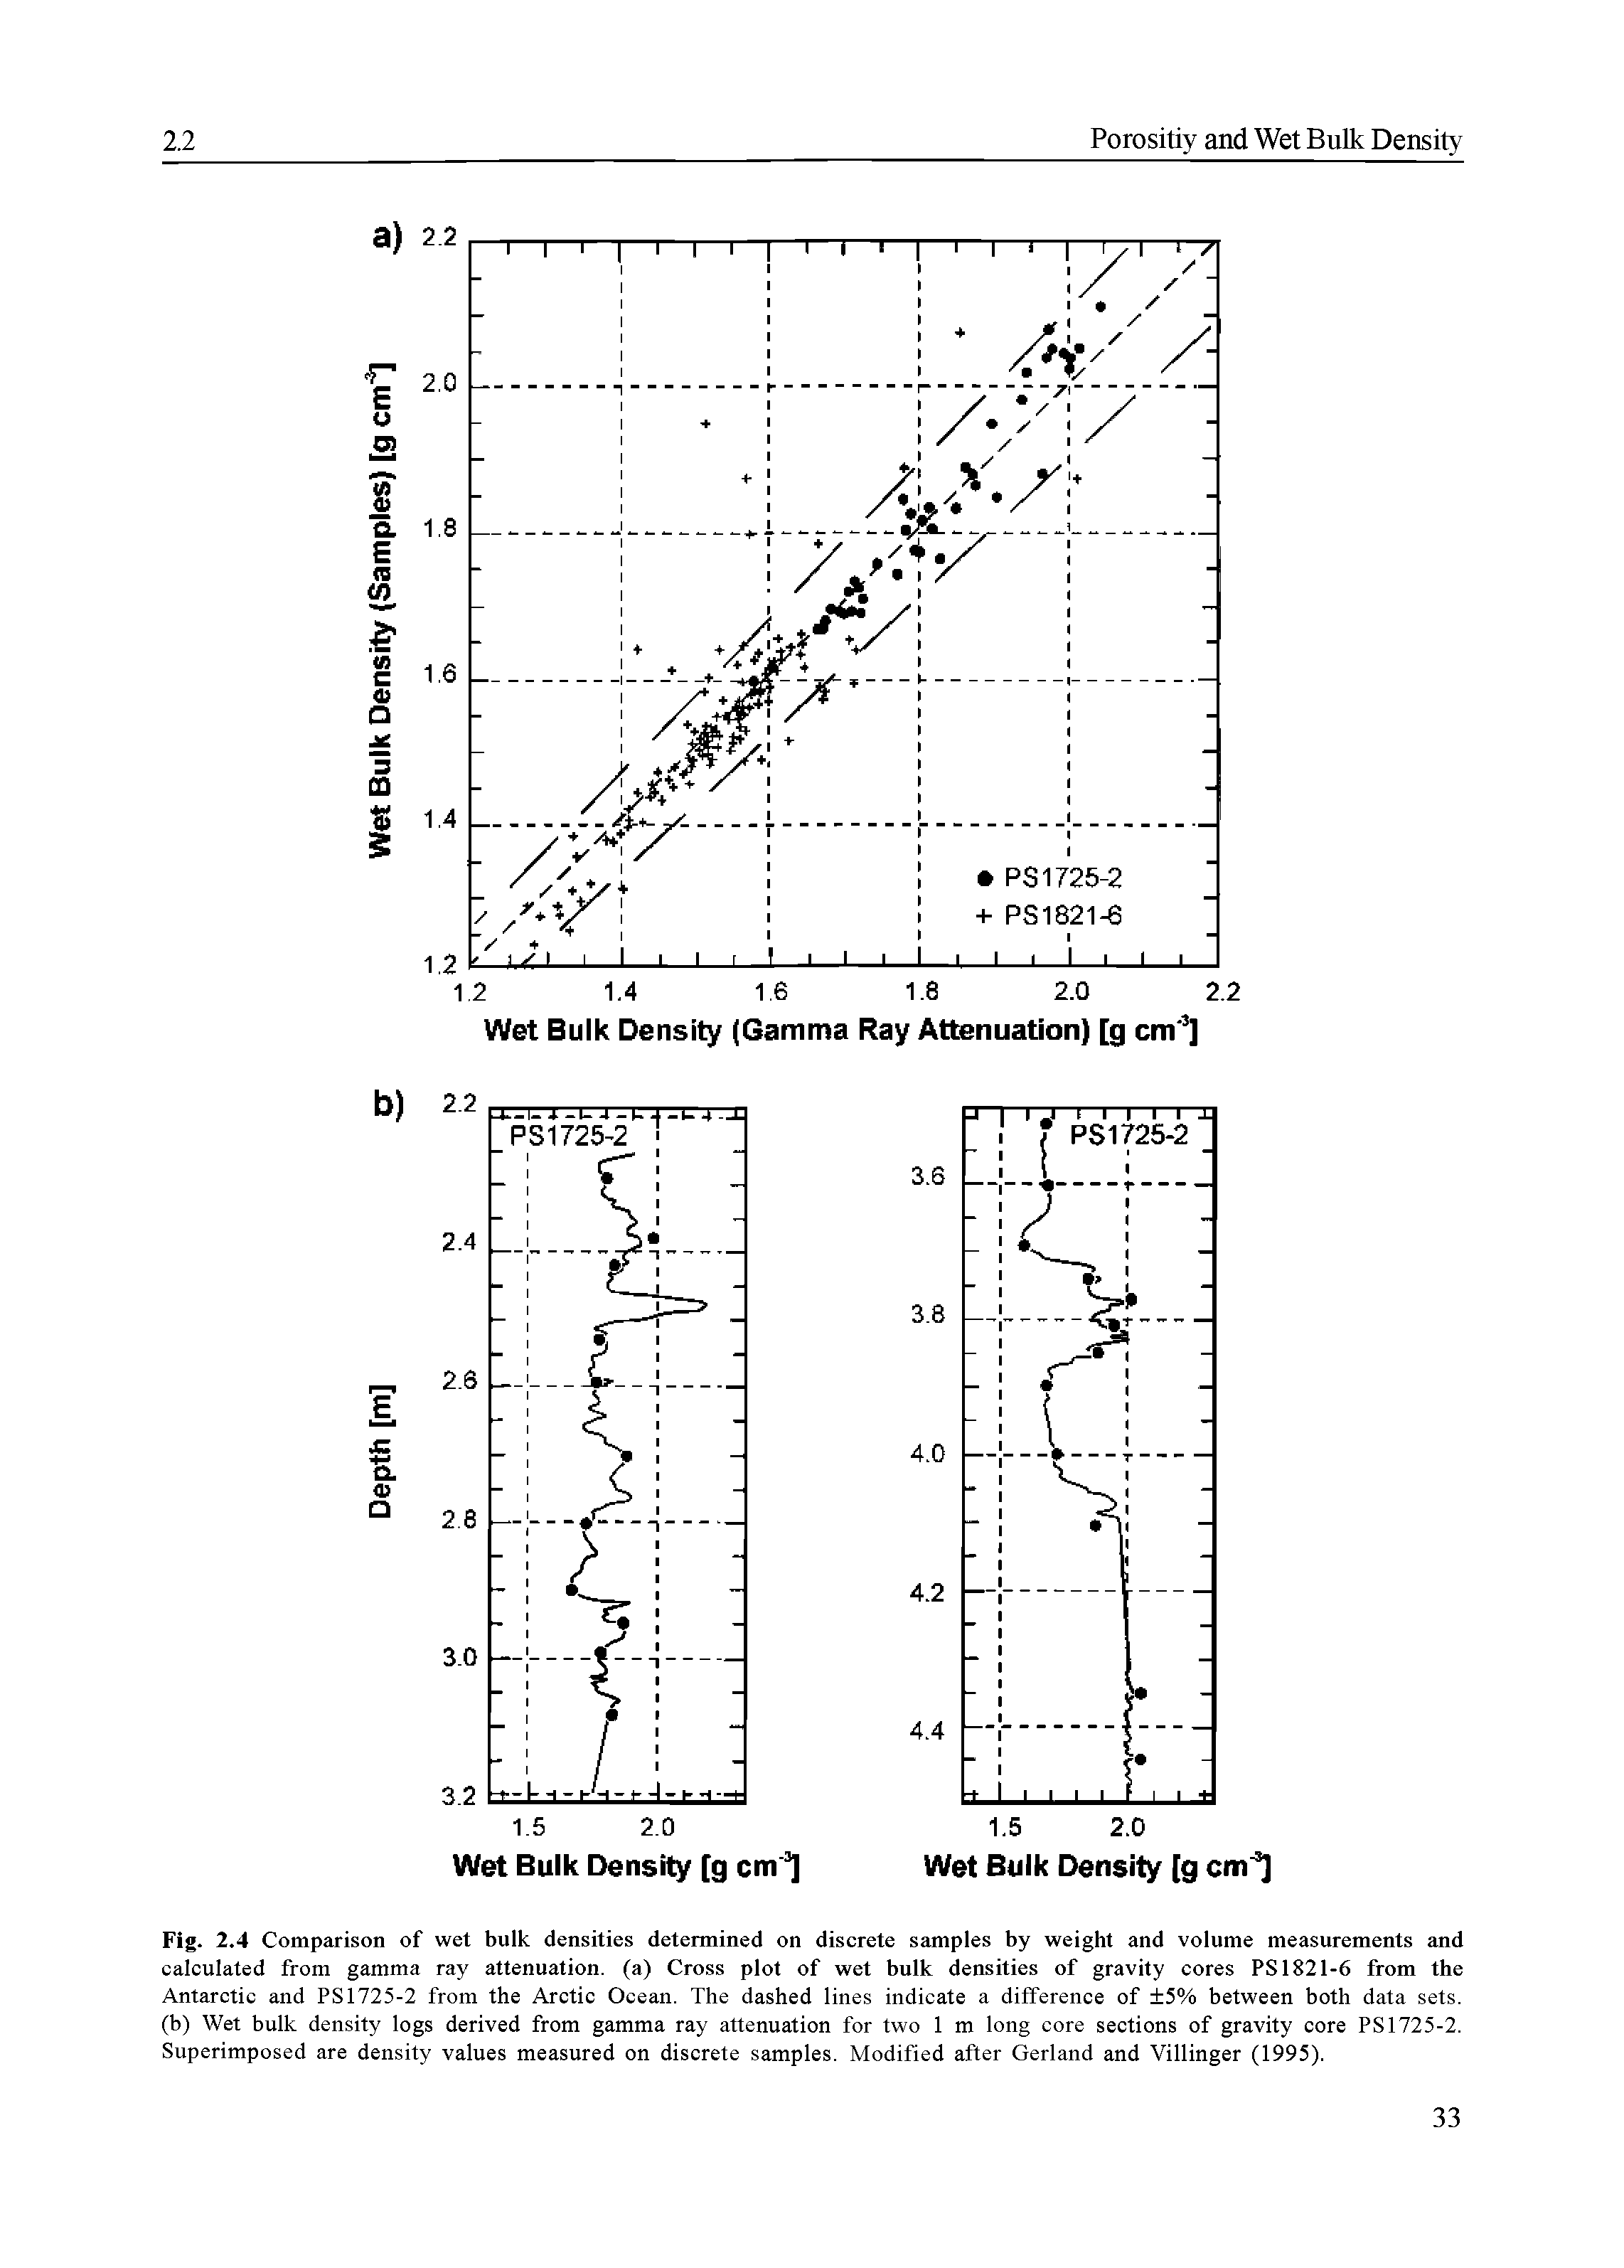 Fig. 2.4 Comparison of wet bulk densities determined on discrete samples by weight and volume measurements and calculated from gamma ray attenuation, (a) Cross plot of wet bulk densities of gravity cores PS 1821-6 from the Antarctic and PS1725-2 from the Arctic Ocean. The dashed lines indicate a difference of 5% between both data sets, (b) Wet bulk density logs derived from gamma ray attenuation for two 1 m long core sections of gravity core PS1725-2. Superimposed are density values measured on discrete samples. Modified after Gerland and Villinger (1995).